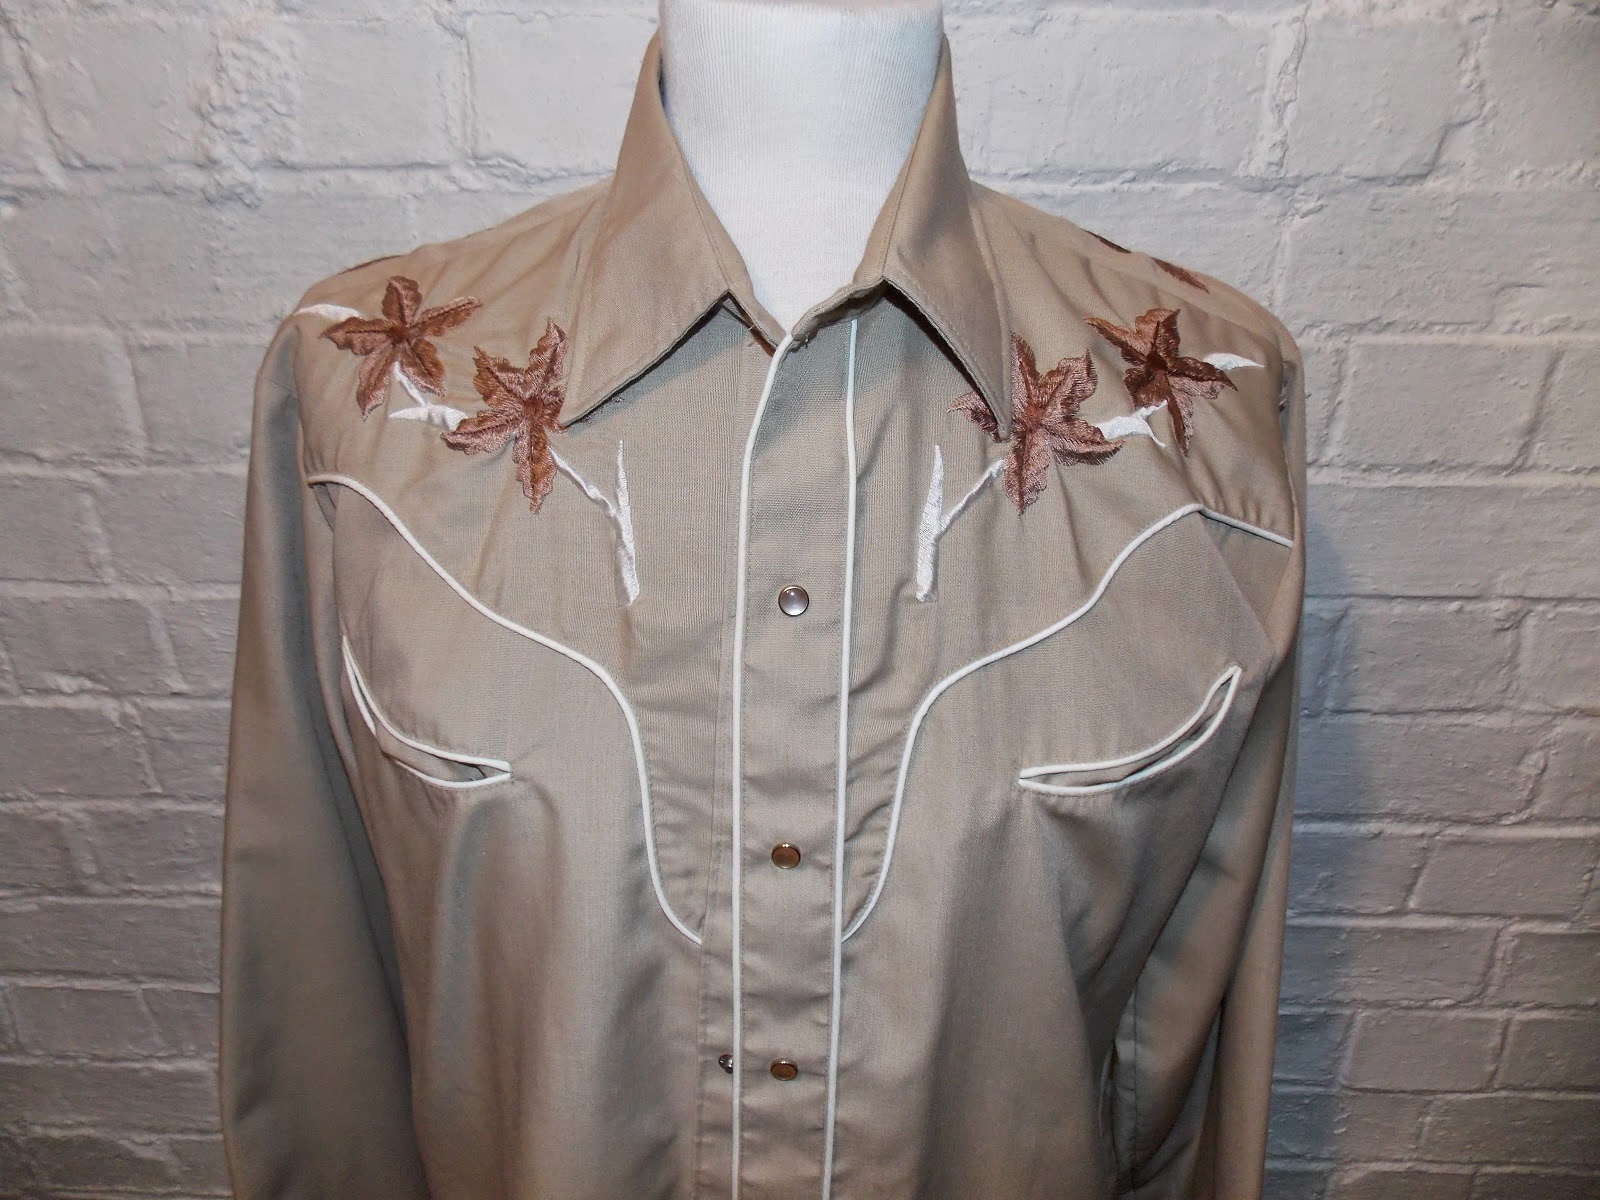 Gama Clothing Presents!: Previously Owned - Great western shirt